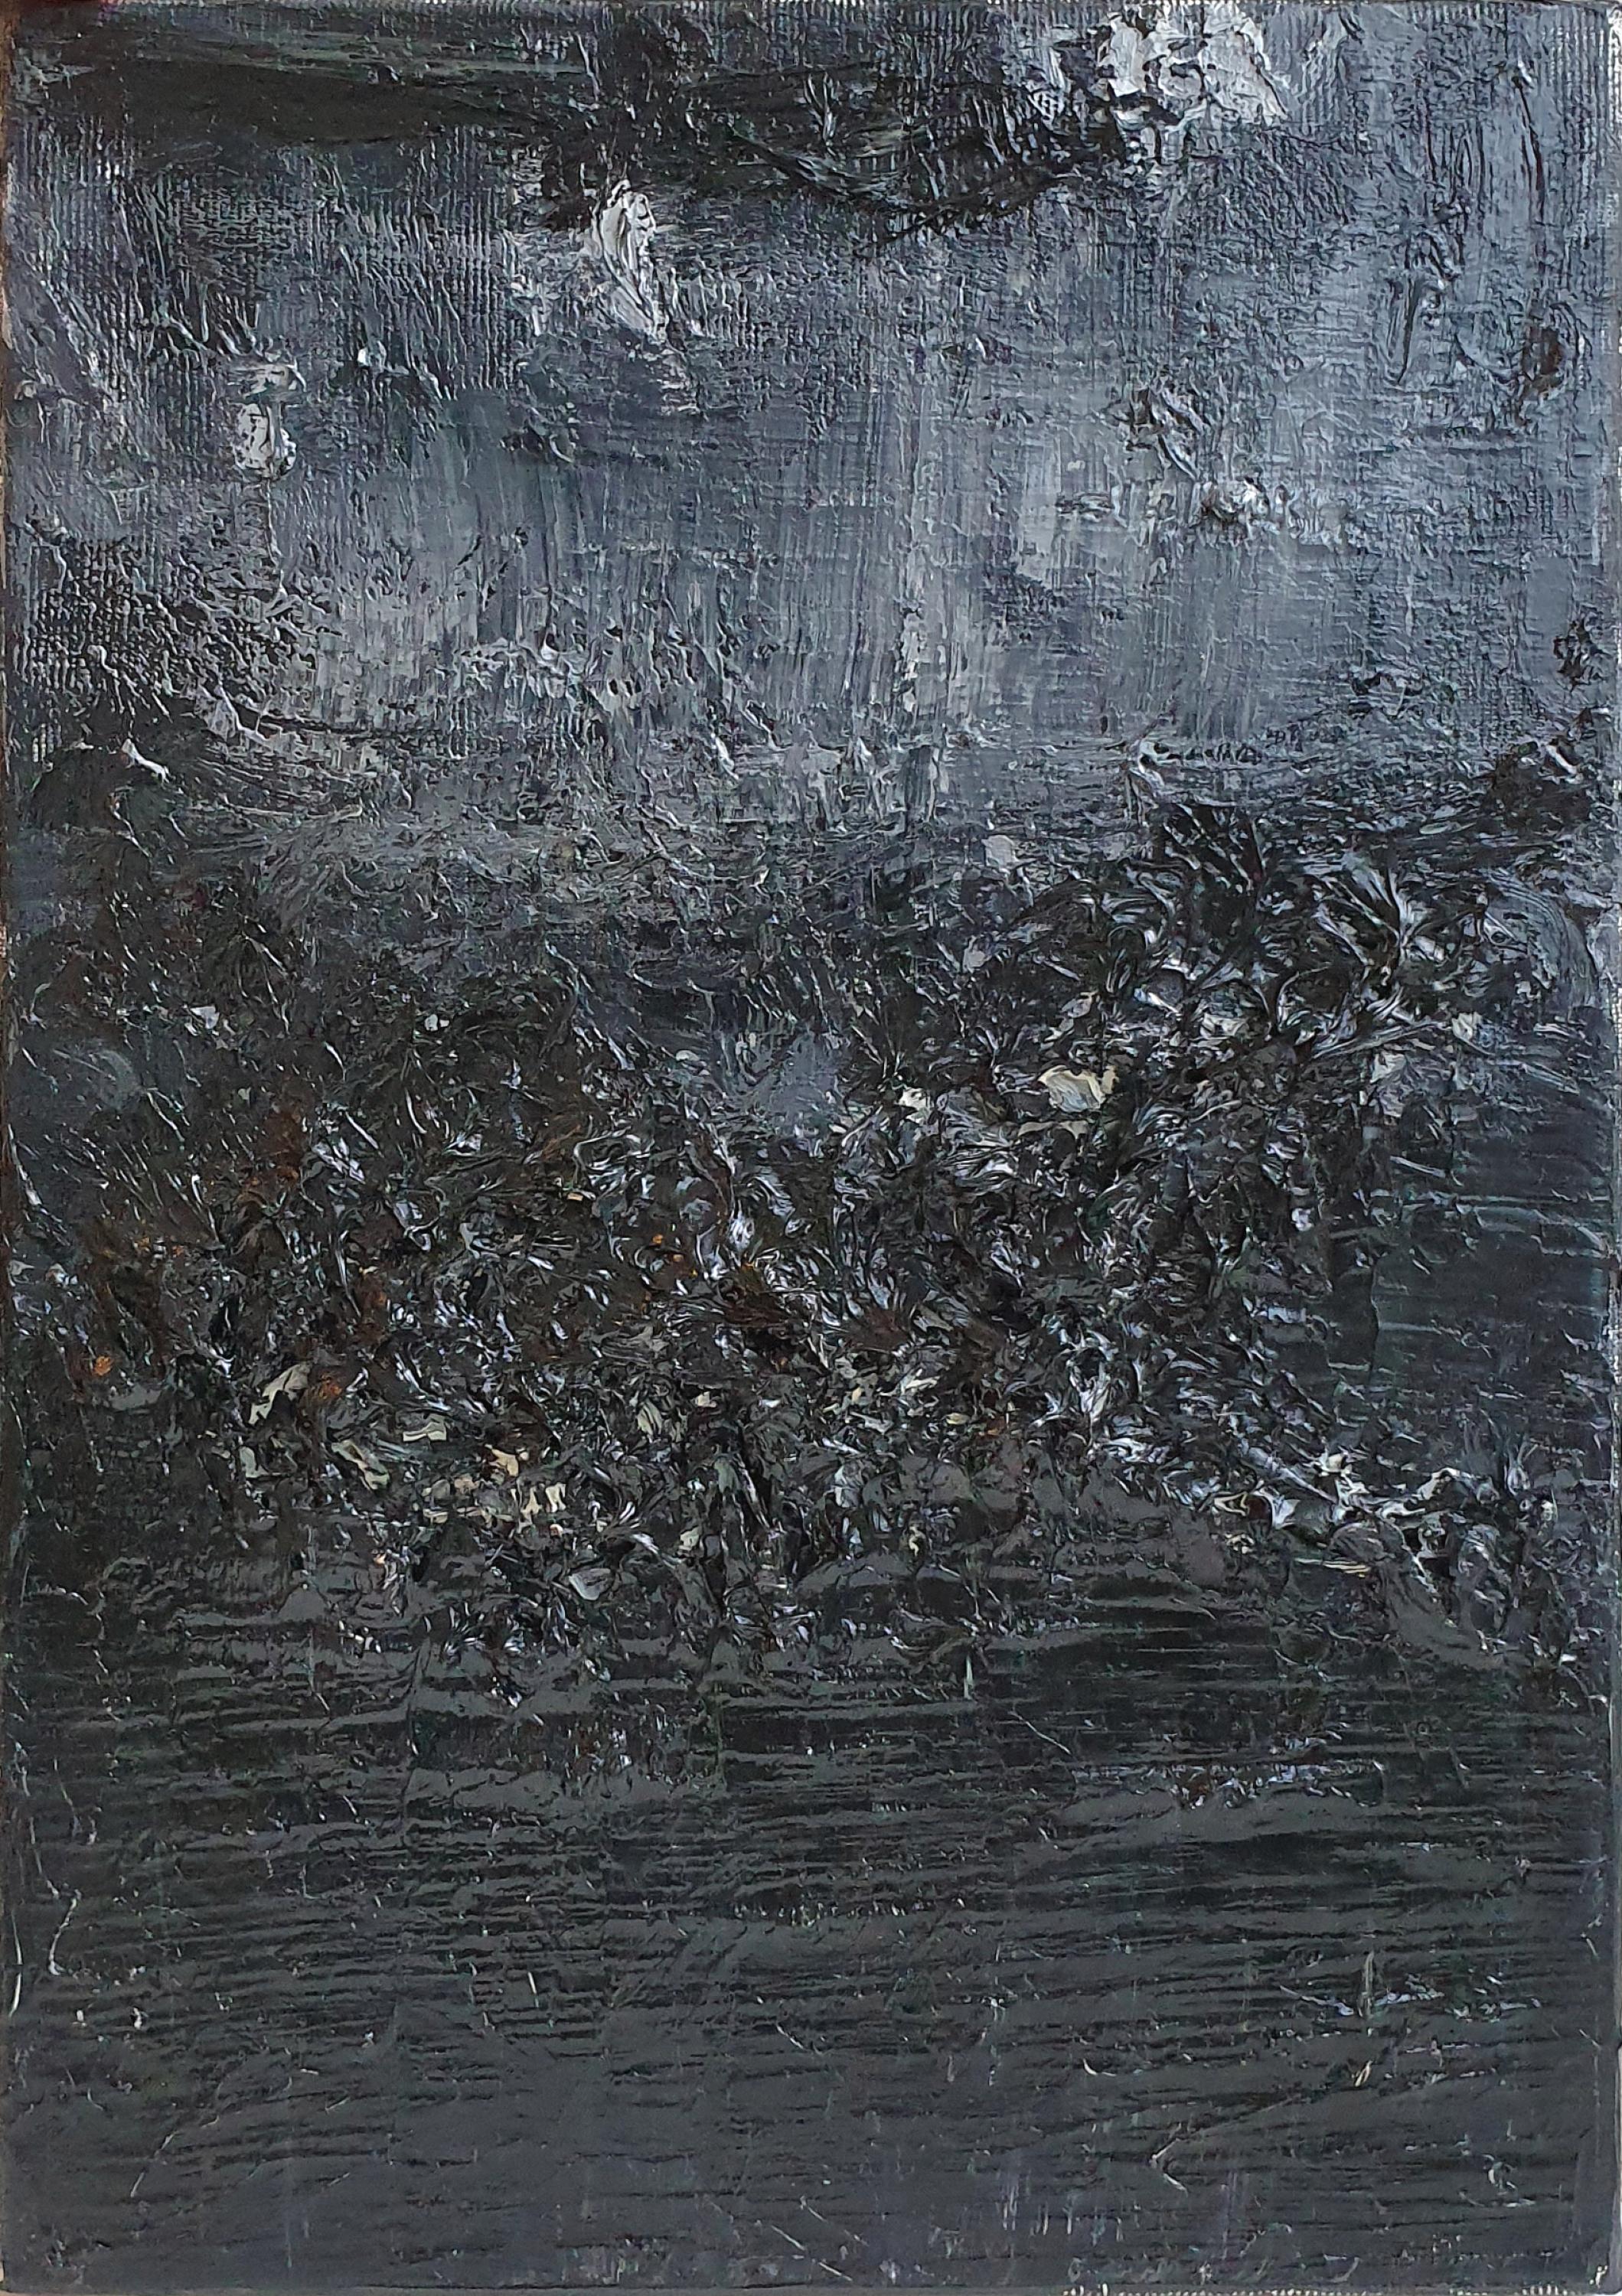 Zsolt Berszán Abstract Painting - Untitled 07 - 21st Century, Abstract, Black, White, Contemporary, Organic